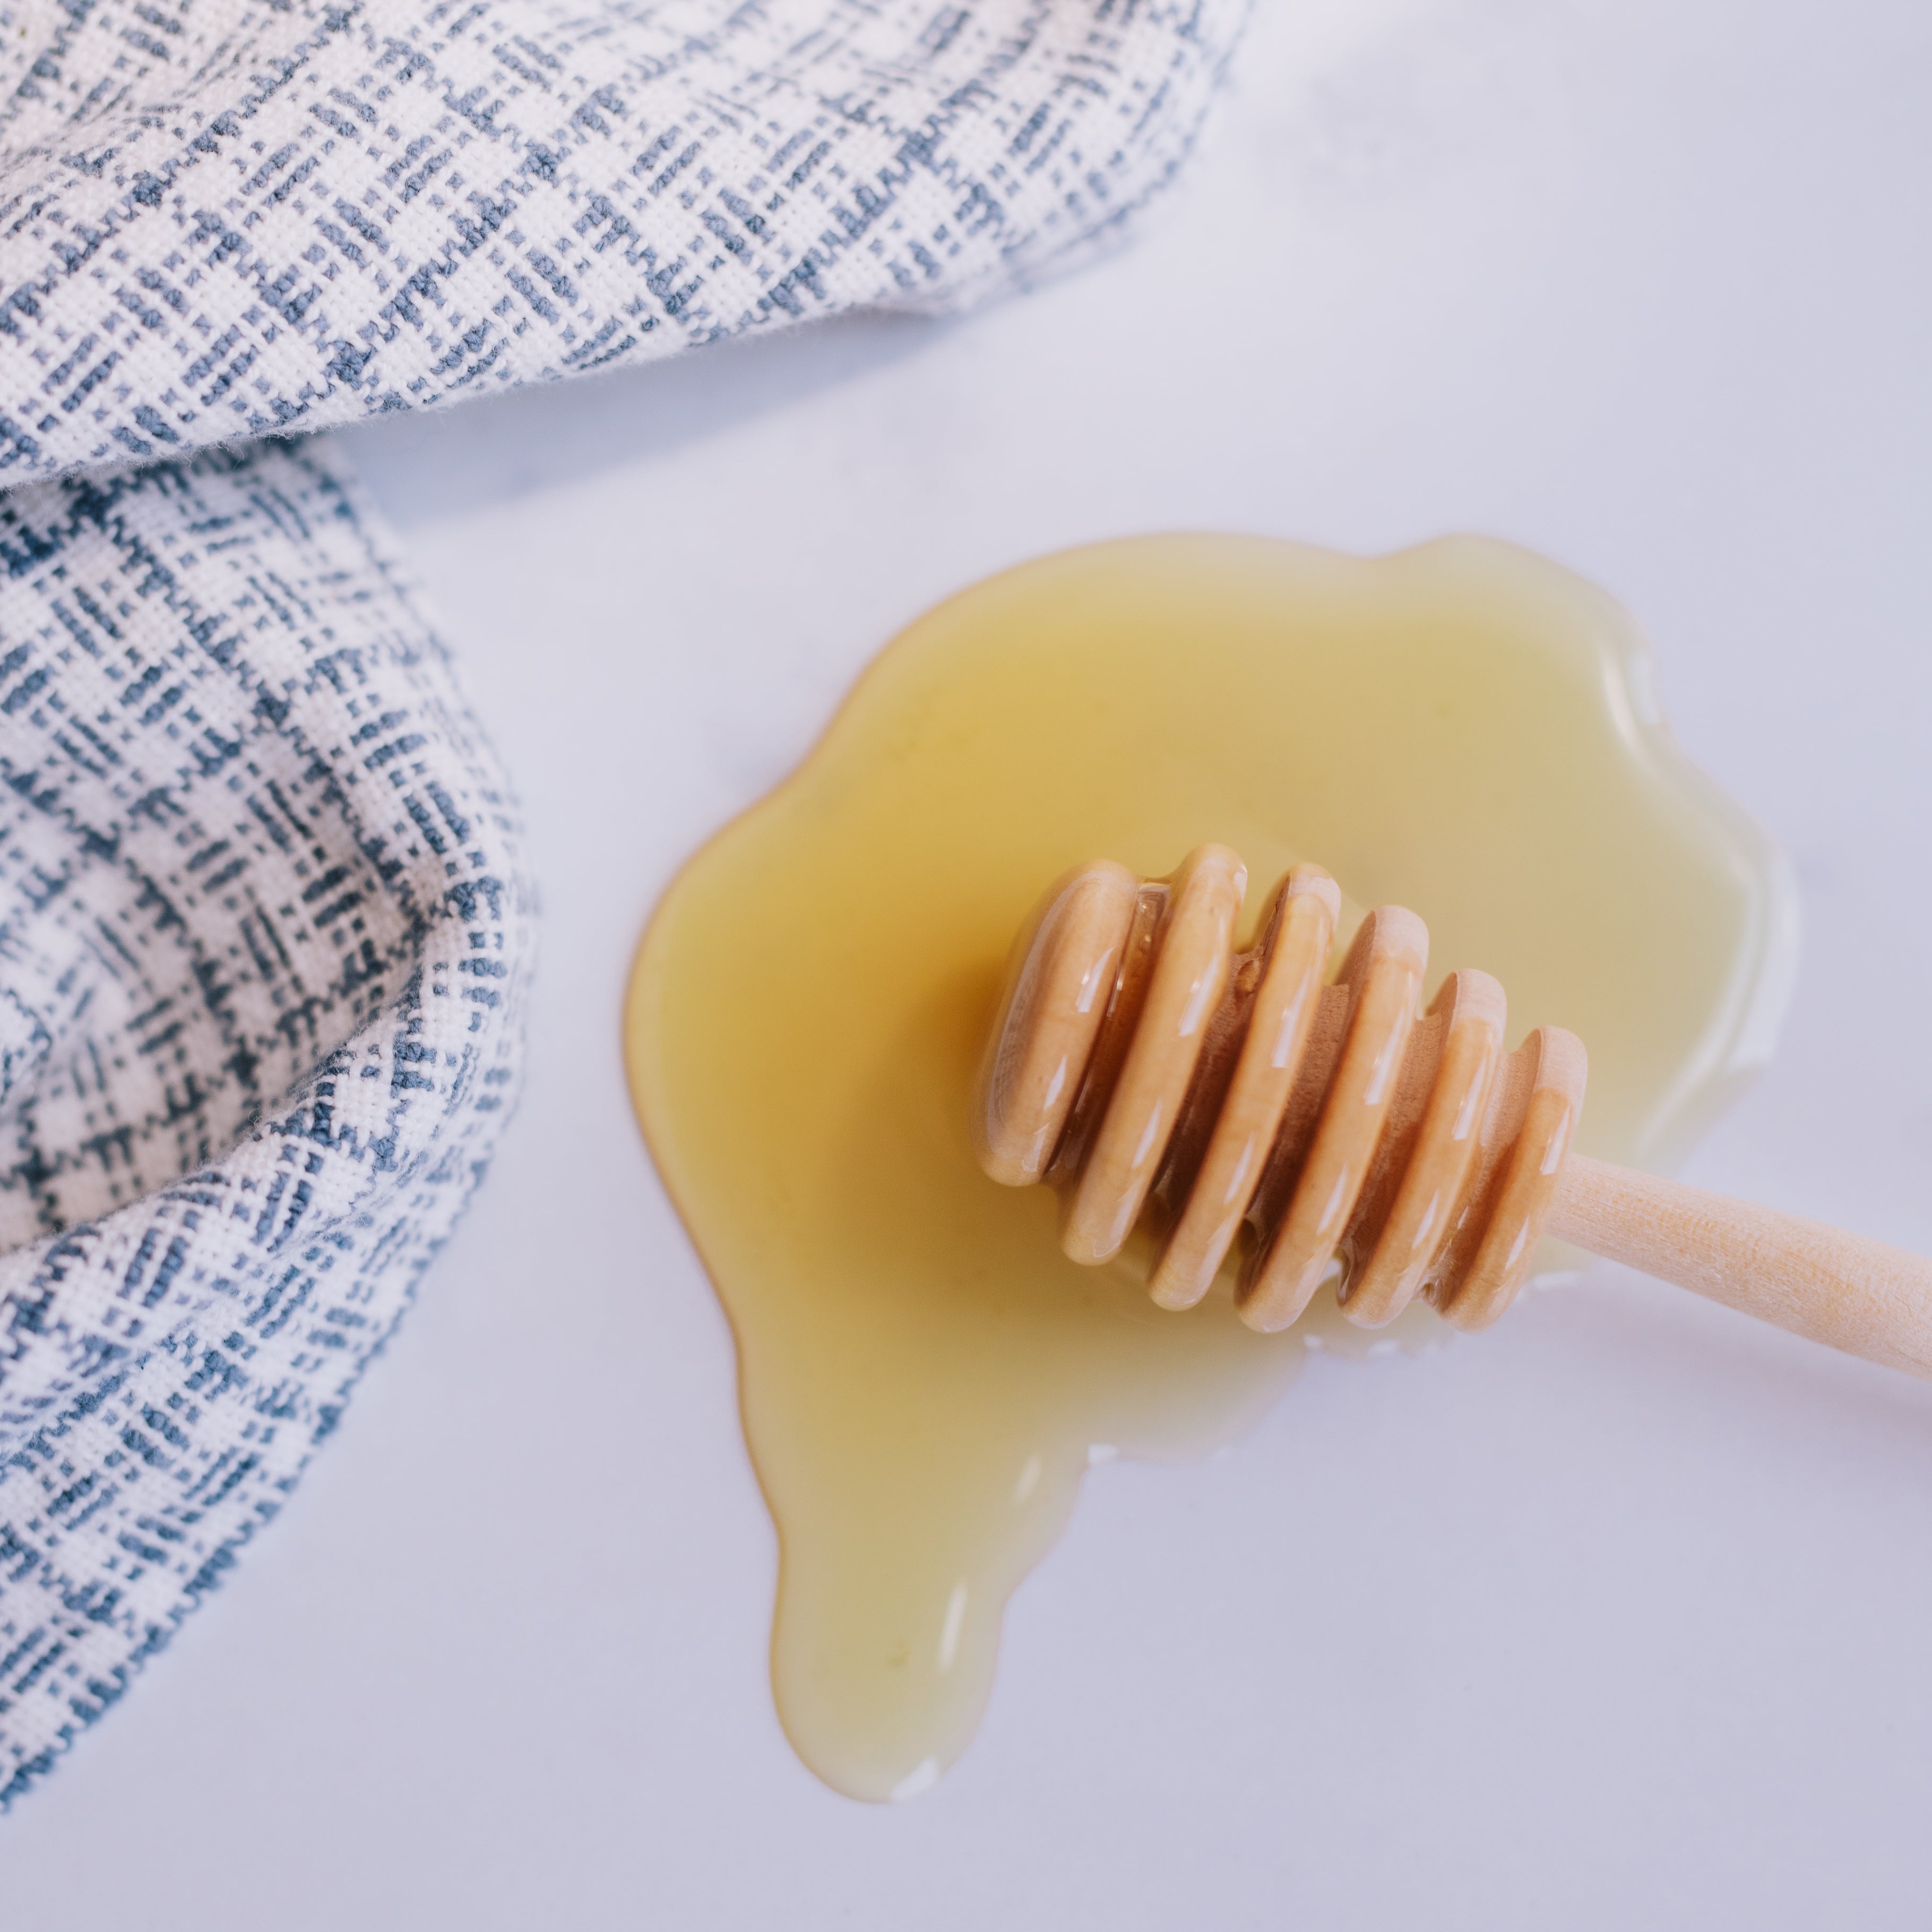 spilled golden honey with honey dipper and blue and white checked towel